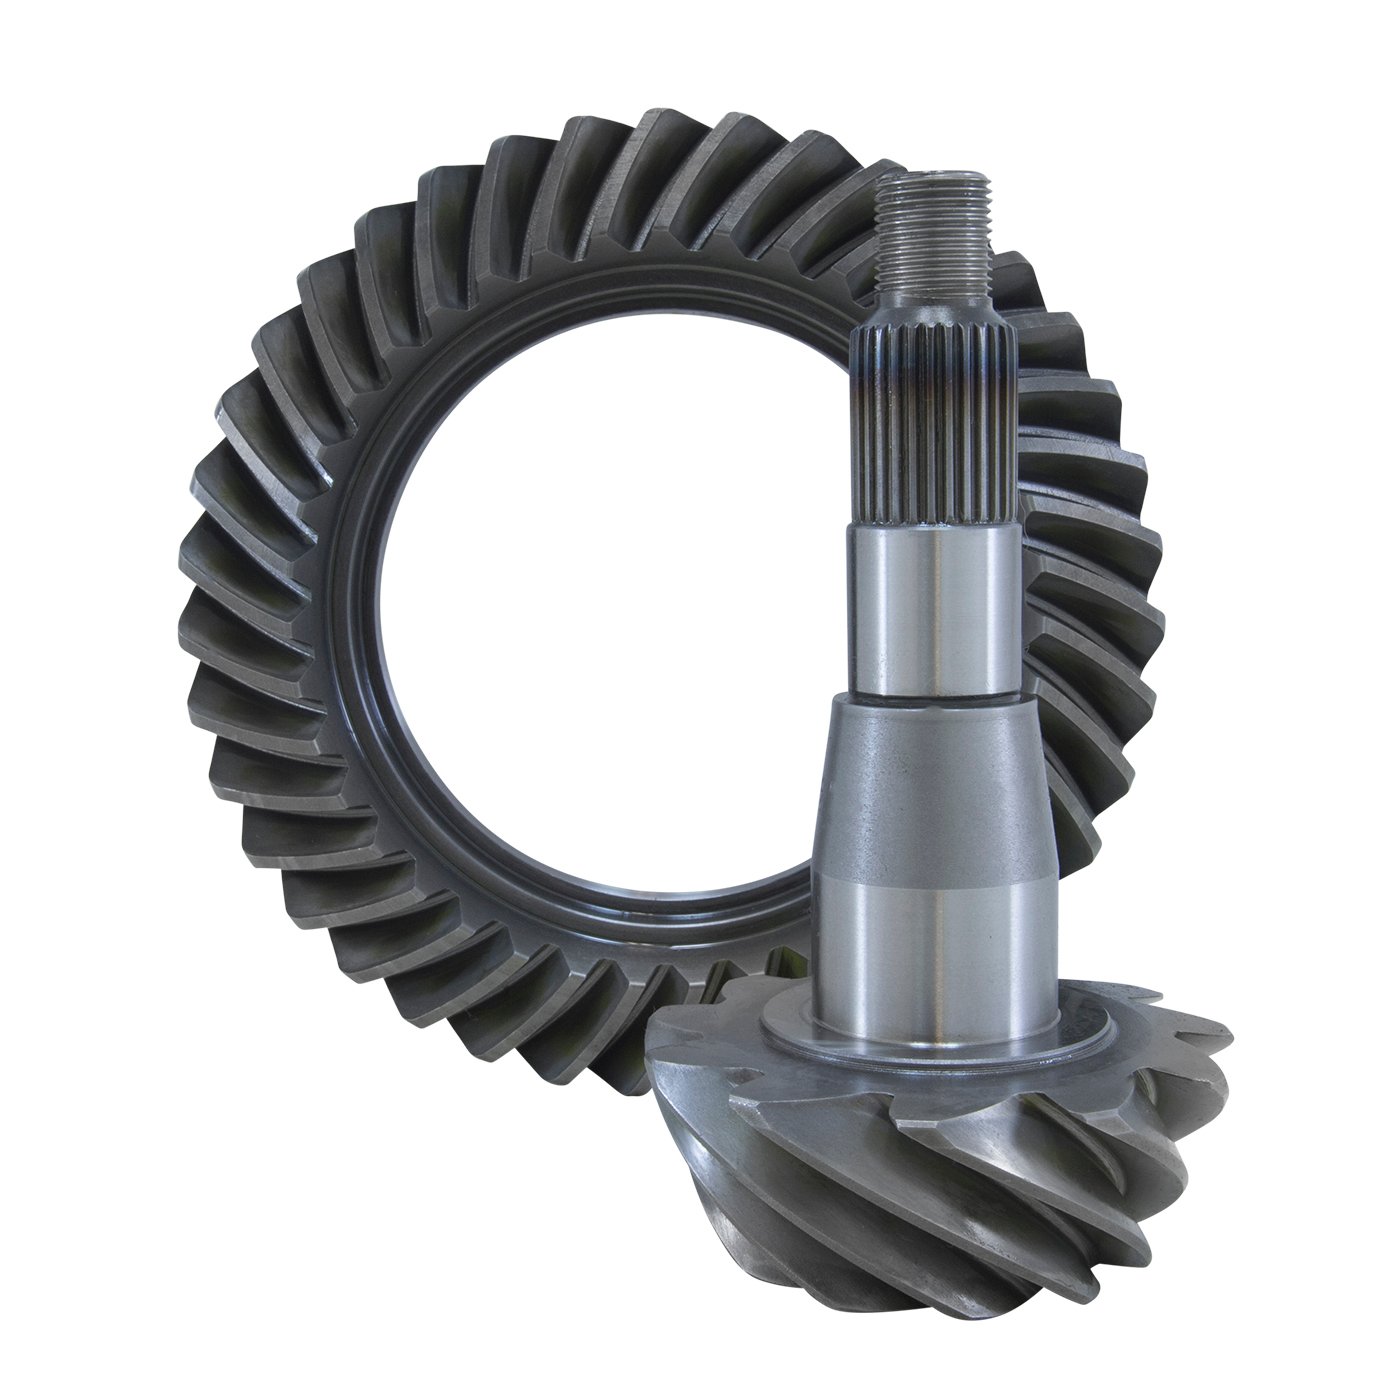 USA Standard 36358 Ring & Pinion Gear Set, For '11 & Up Chrysler 9.25 Zf, 3.55 Ratio